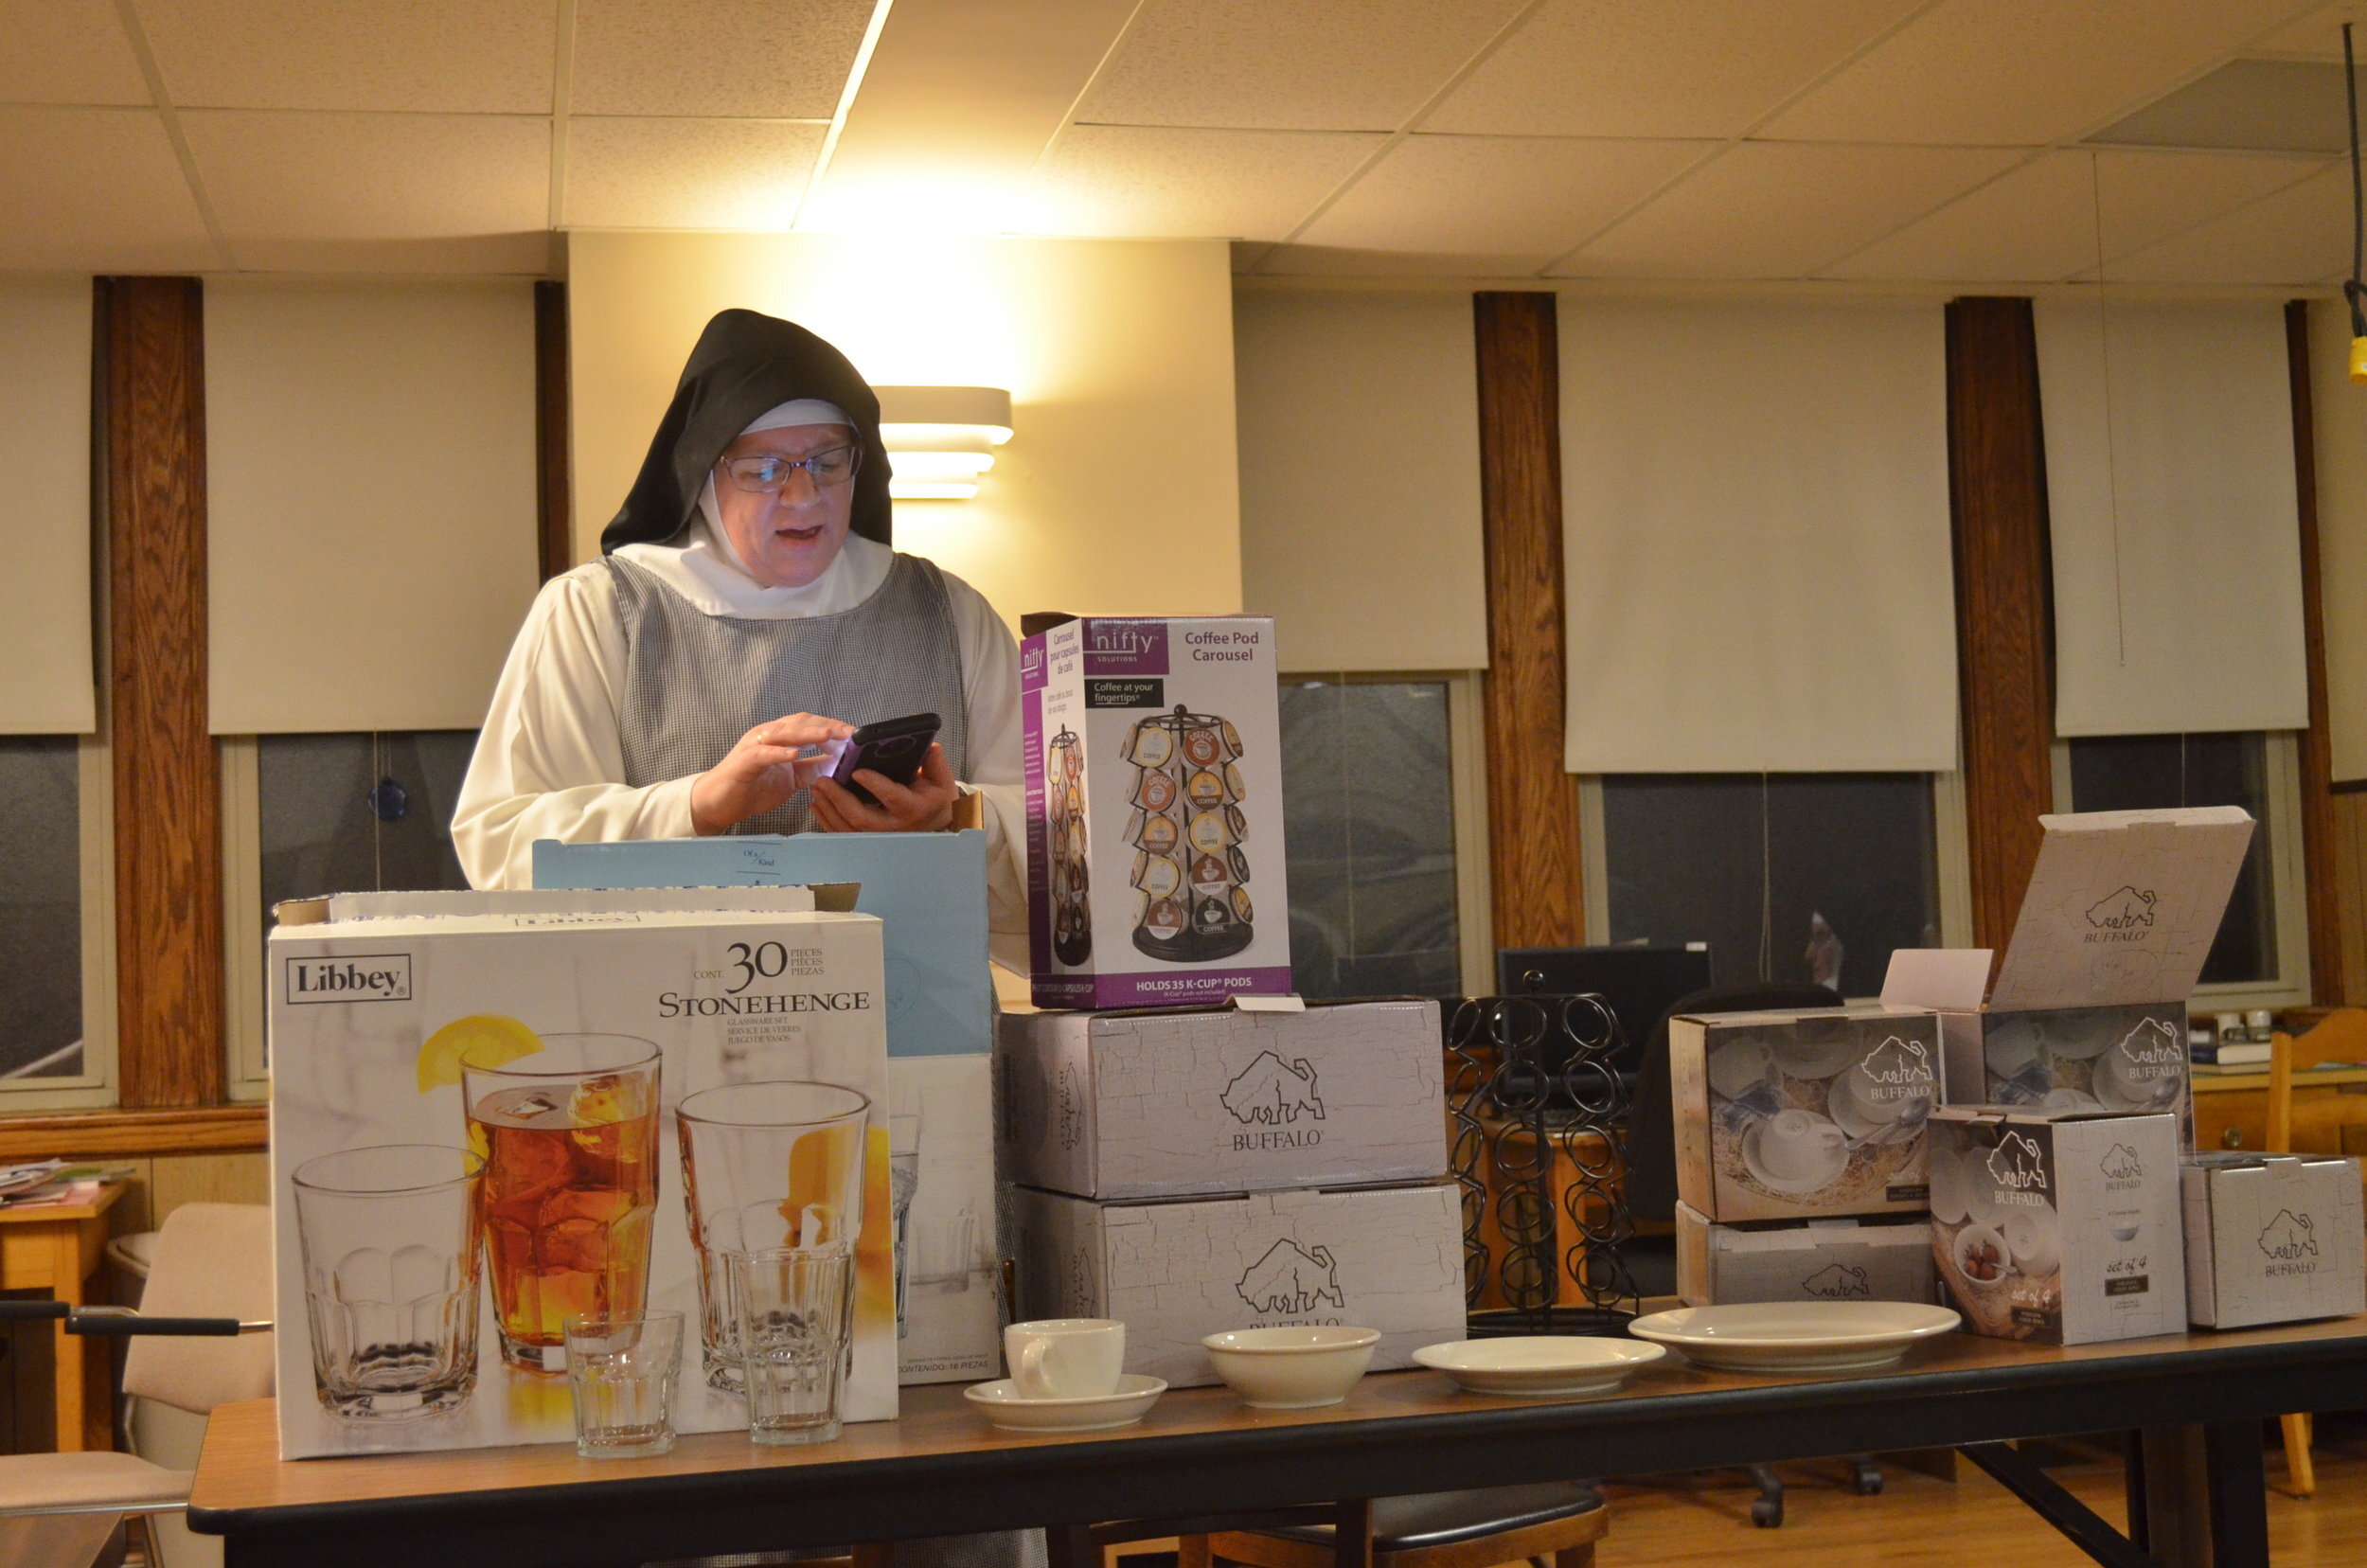 Sr. Judith Miryam reads off the names of the purchasers of the tableware/glassware